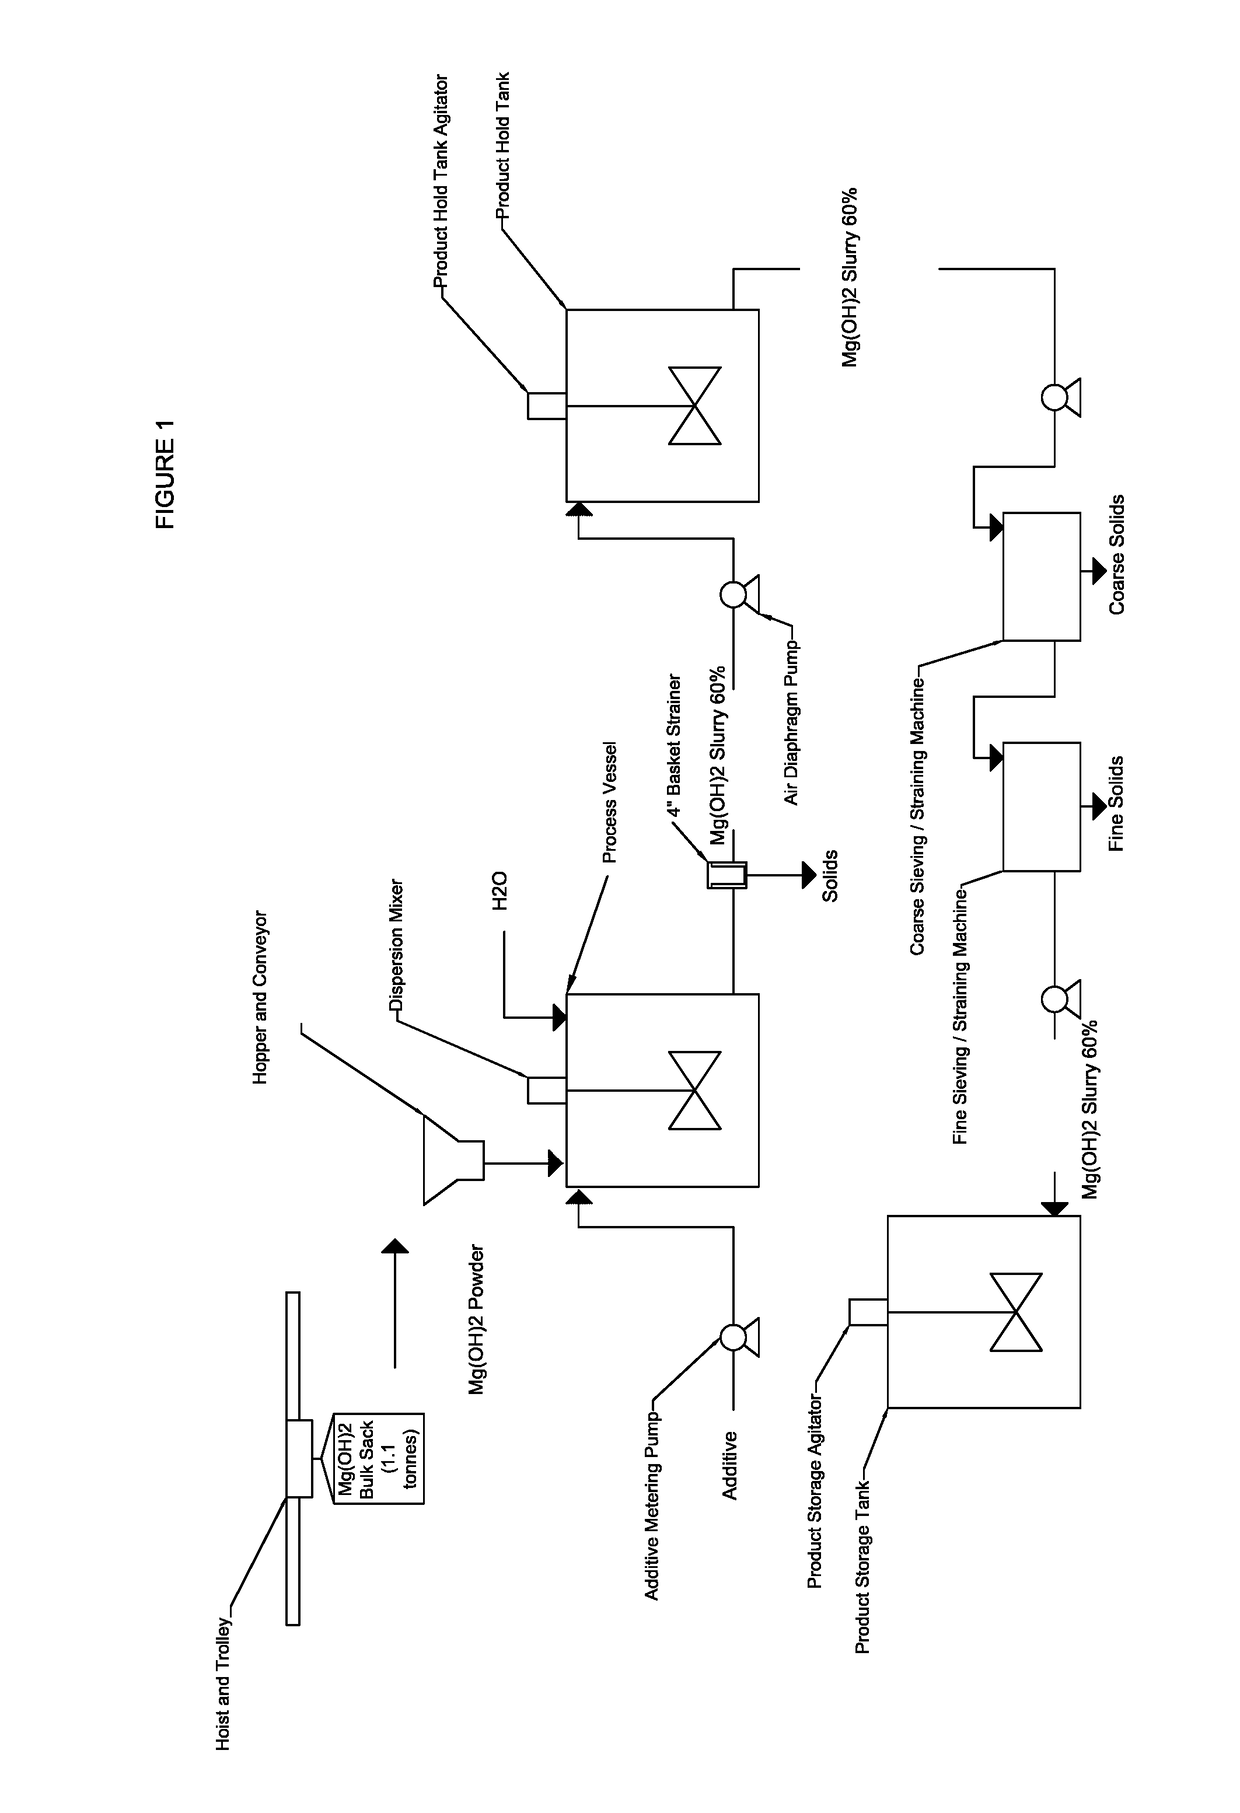 Process for producing a stabilized magnesium hydroxide slurry